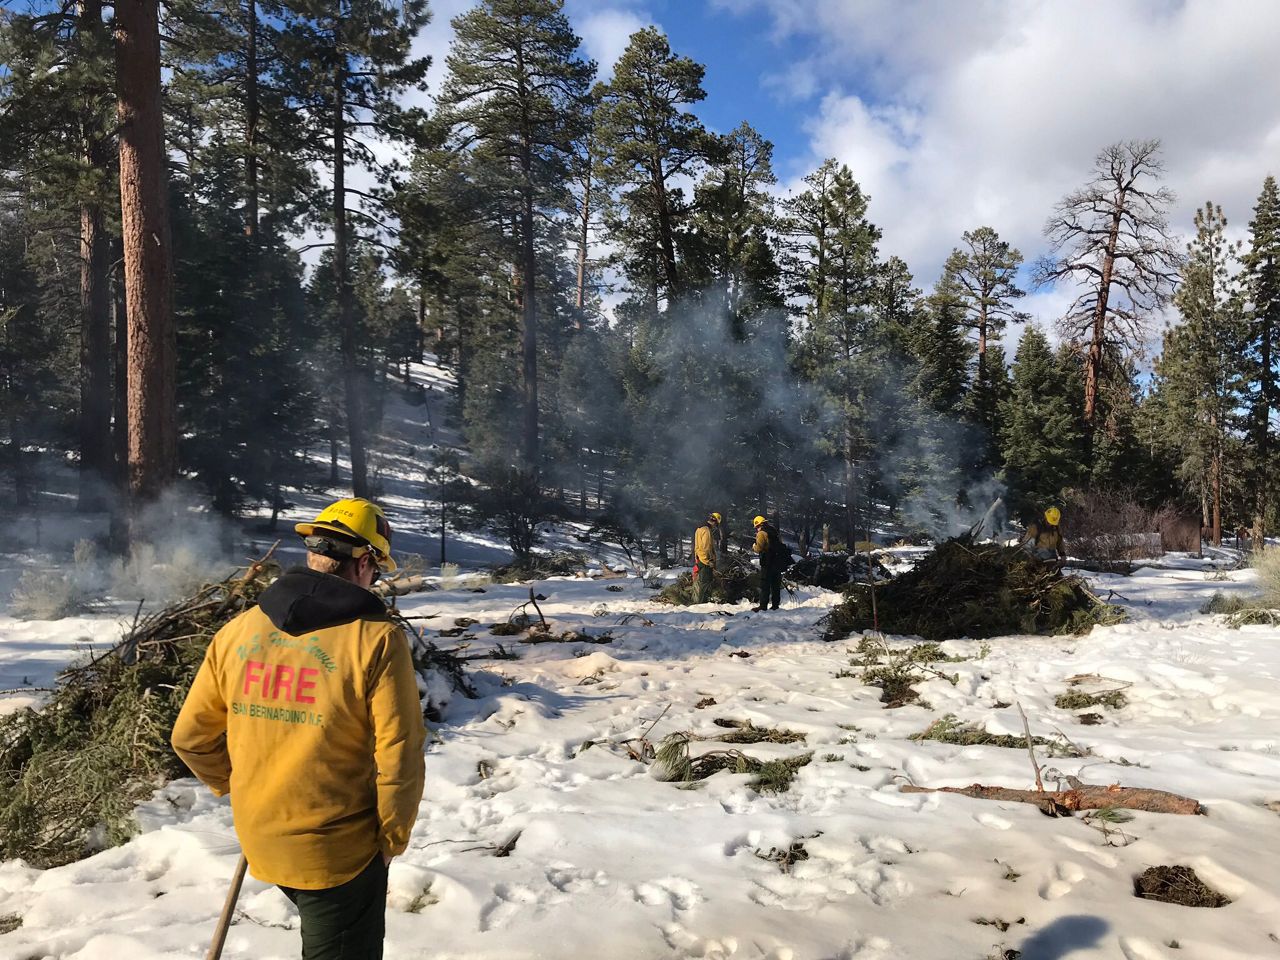 Despite the snow crews will burn piles in Big Bear on November 25 to create a defensible space for the community in case of wildfires.